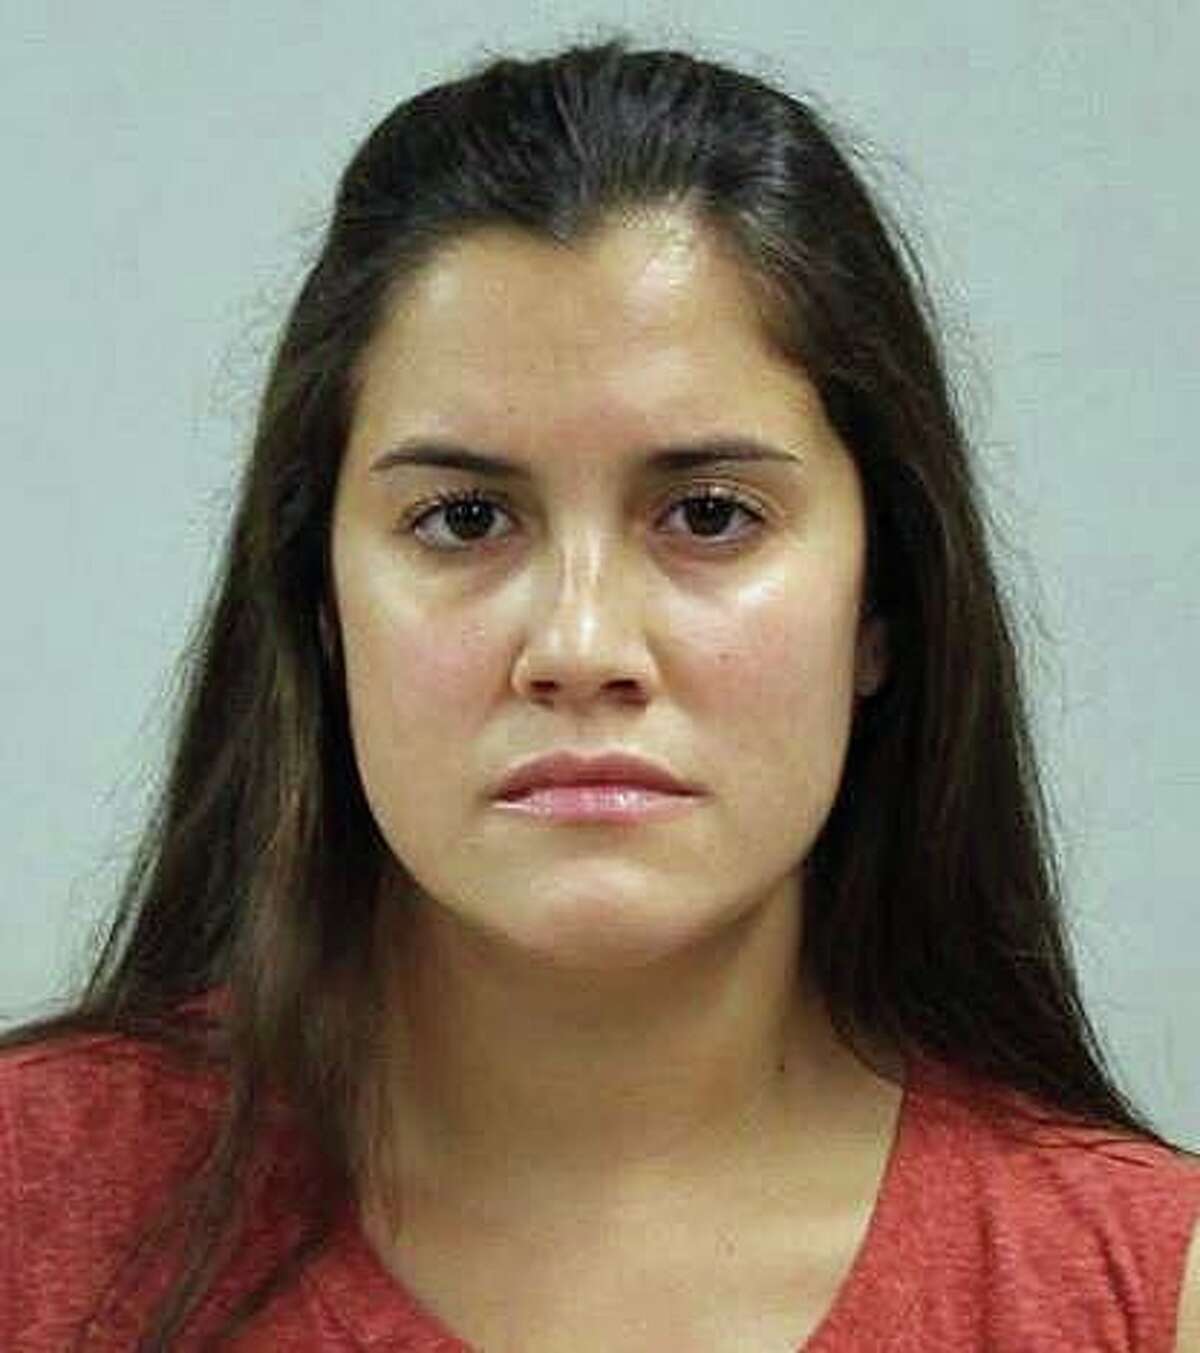 Warrant Topless Norwalk woman bares all to complaining family at Westport beach Sex Image Hq